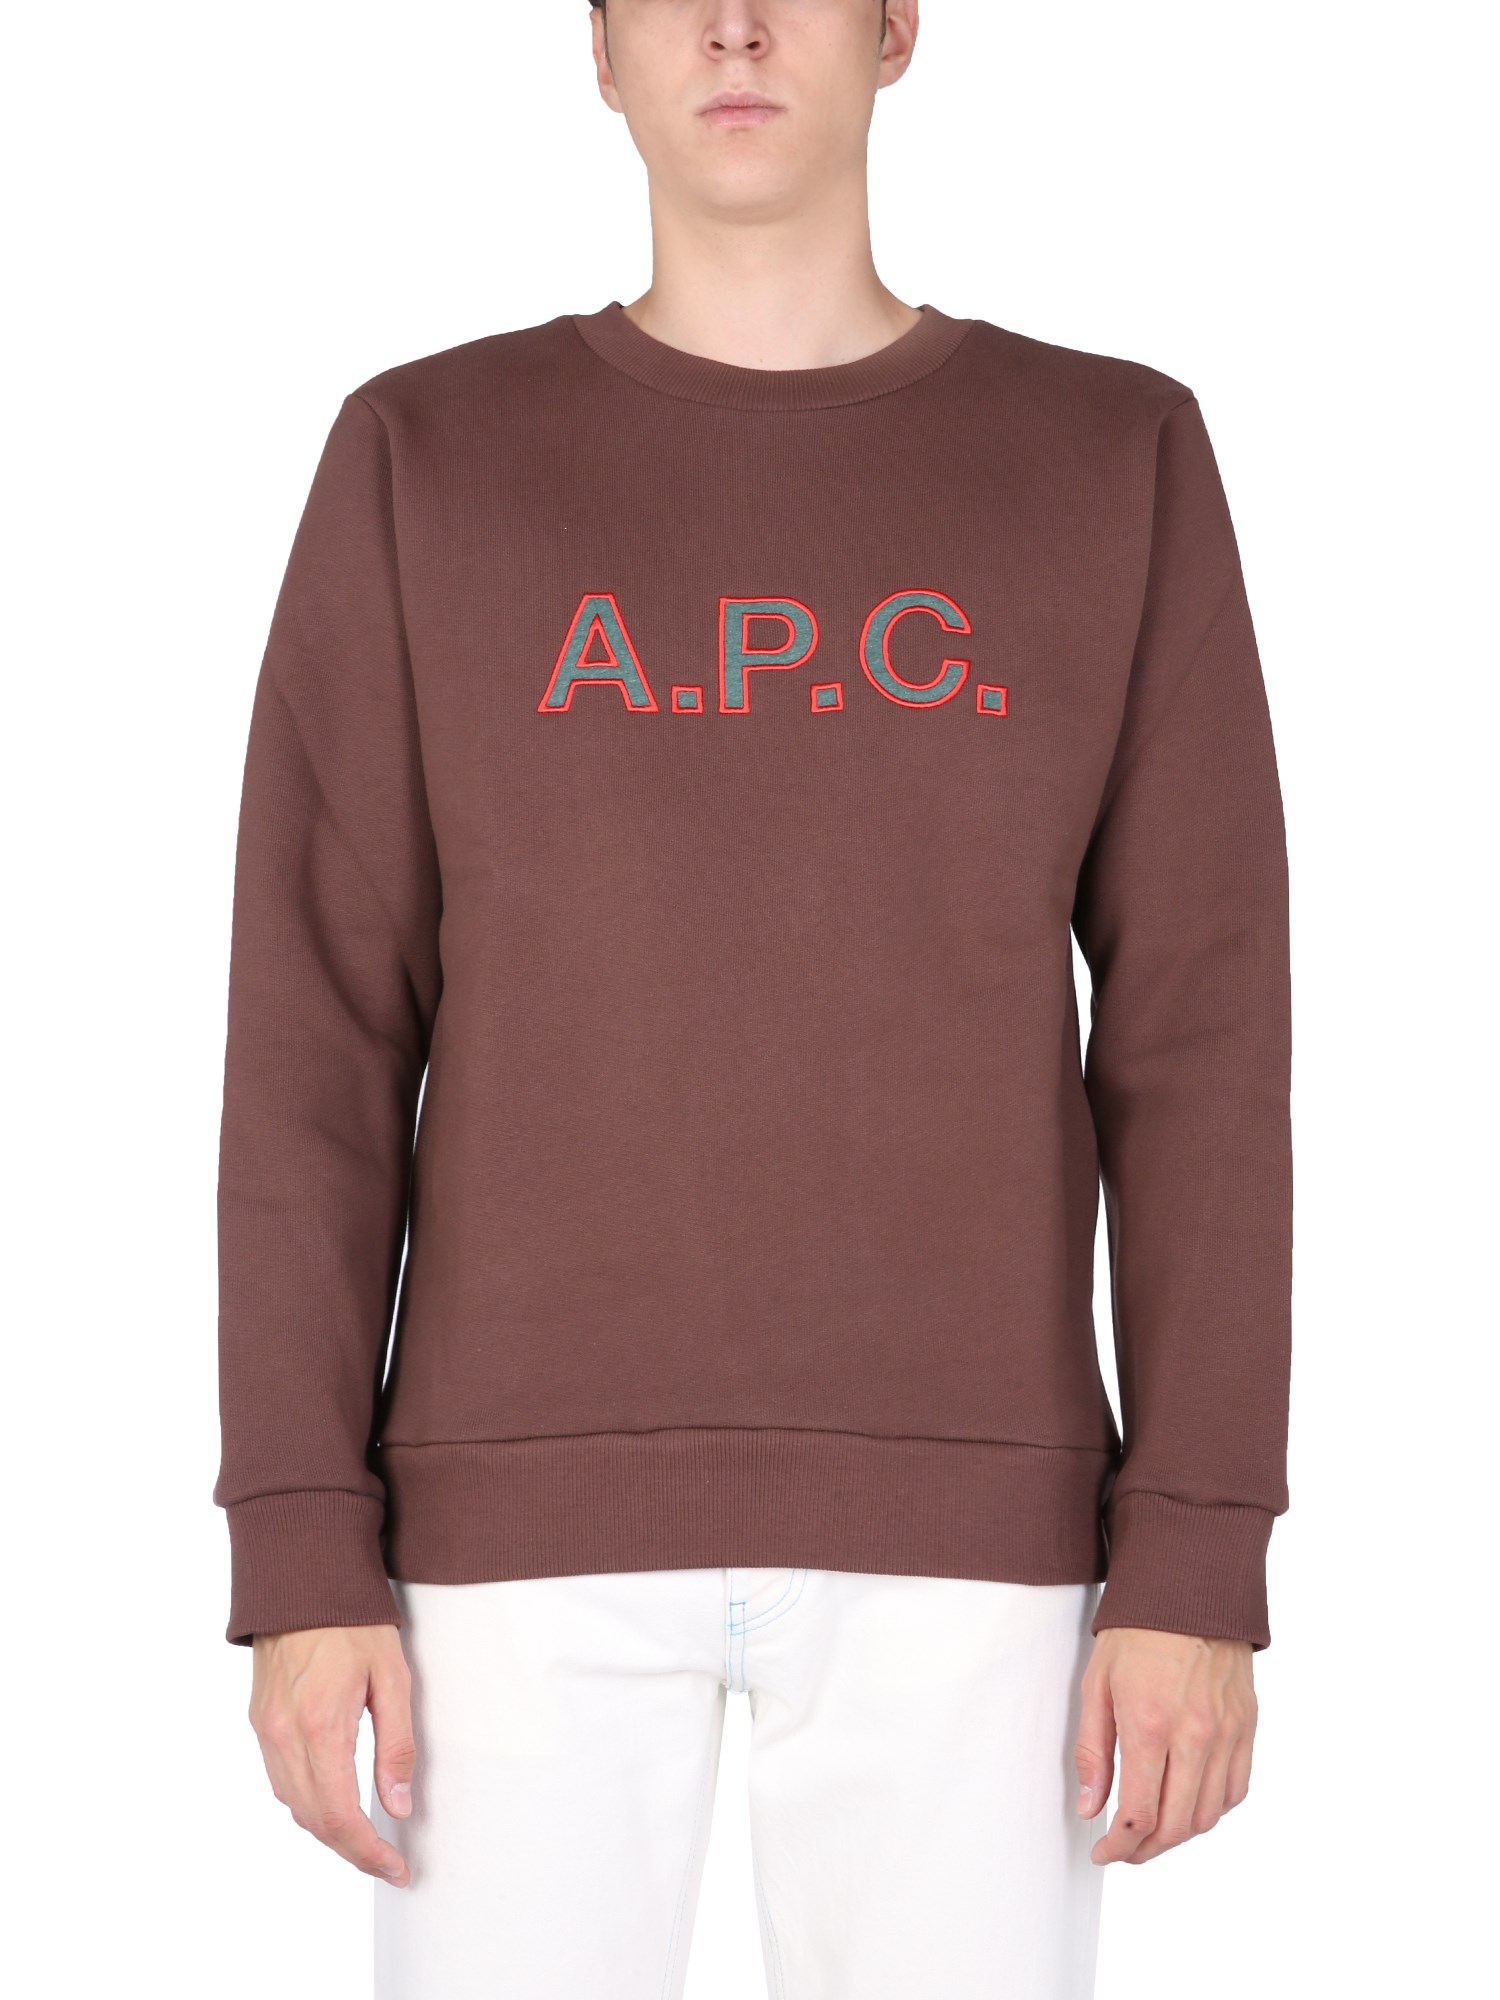 a.p.c. sweatshirt with embroidered logo